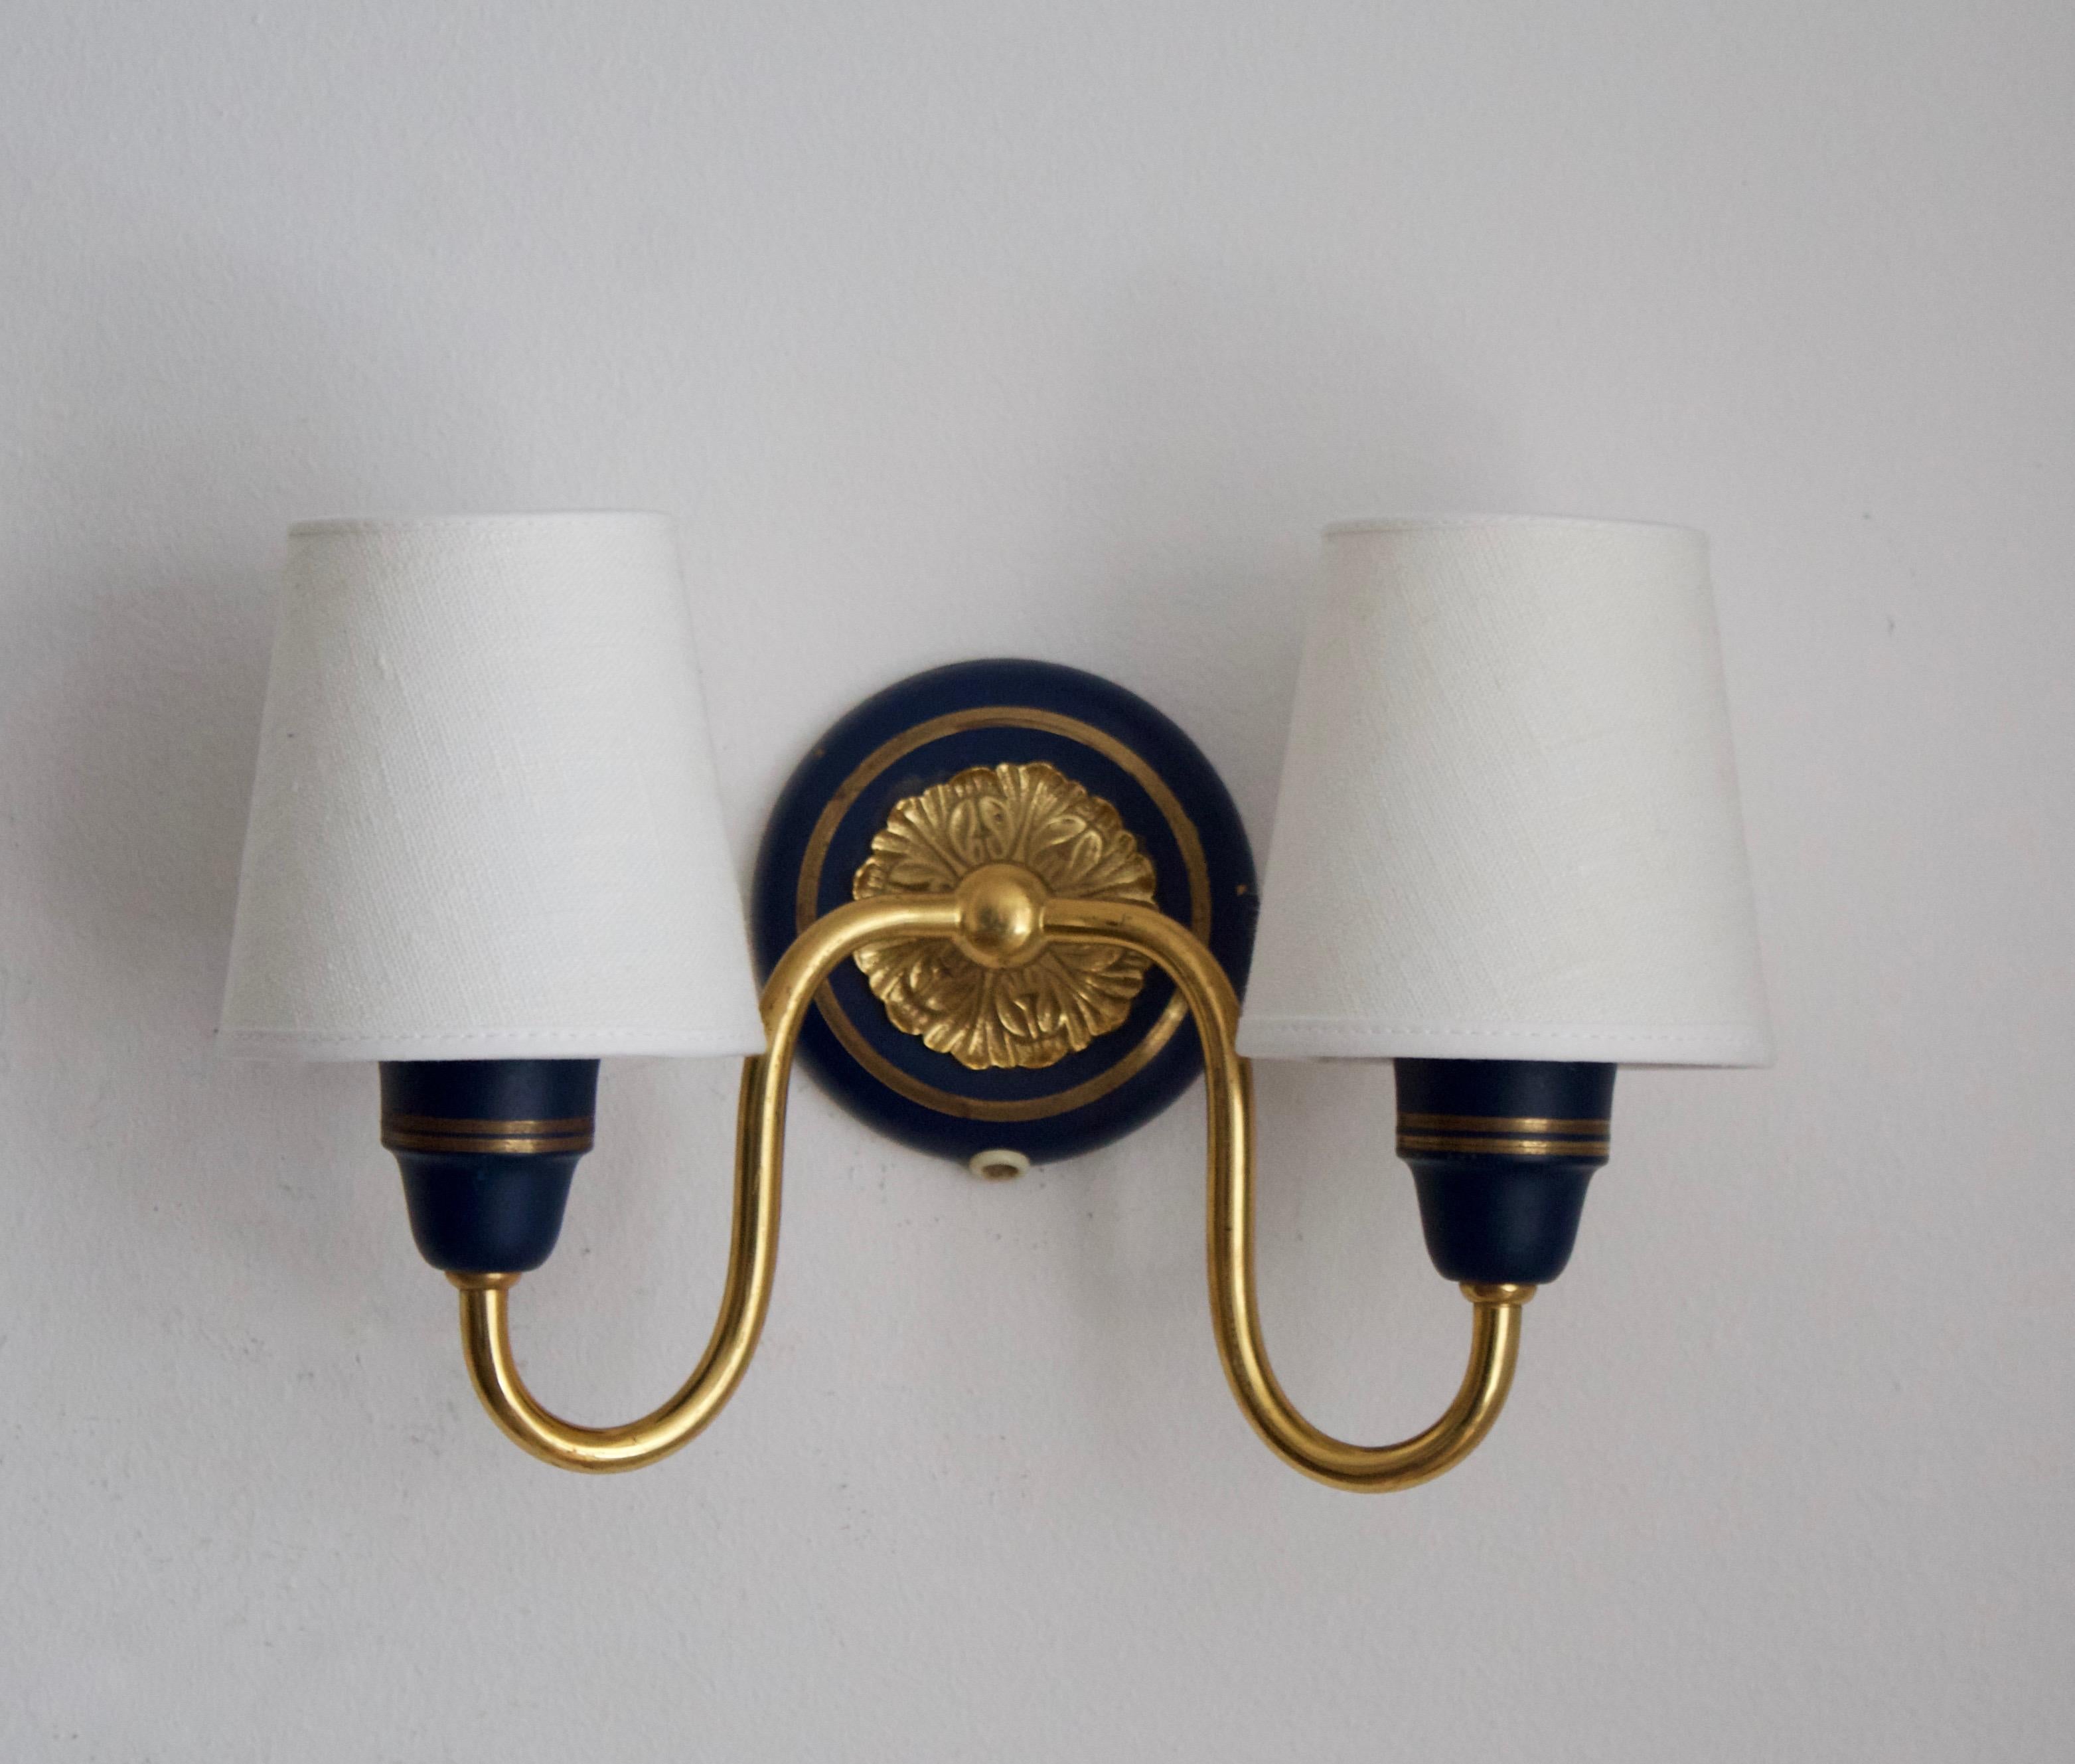 A pair of two-armed wall lights. designed and produced in Sweden, 1950s. Can also function as flush mount ceiling light.

Stated dimensions with lampshades attached.

Back plate dimension 10.8 cm.